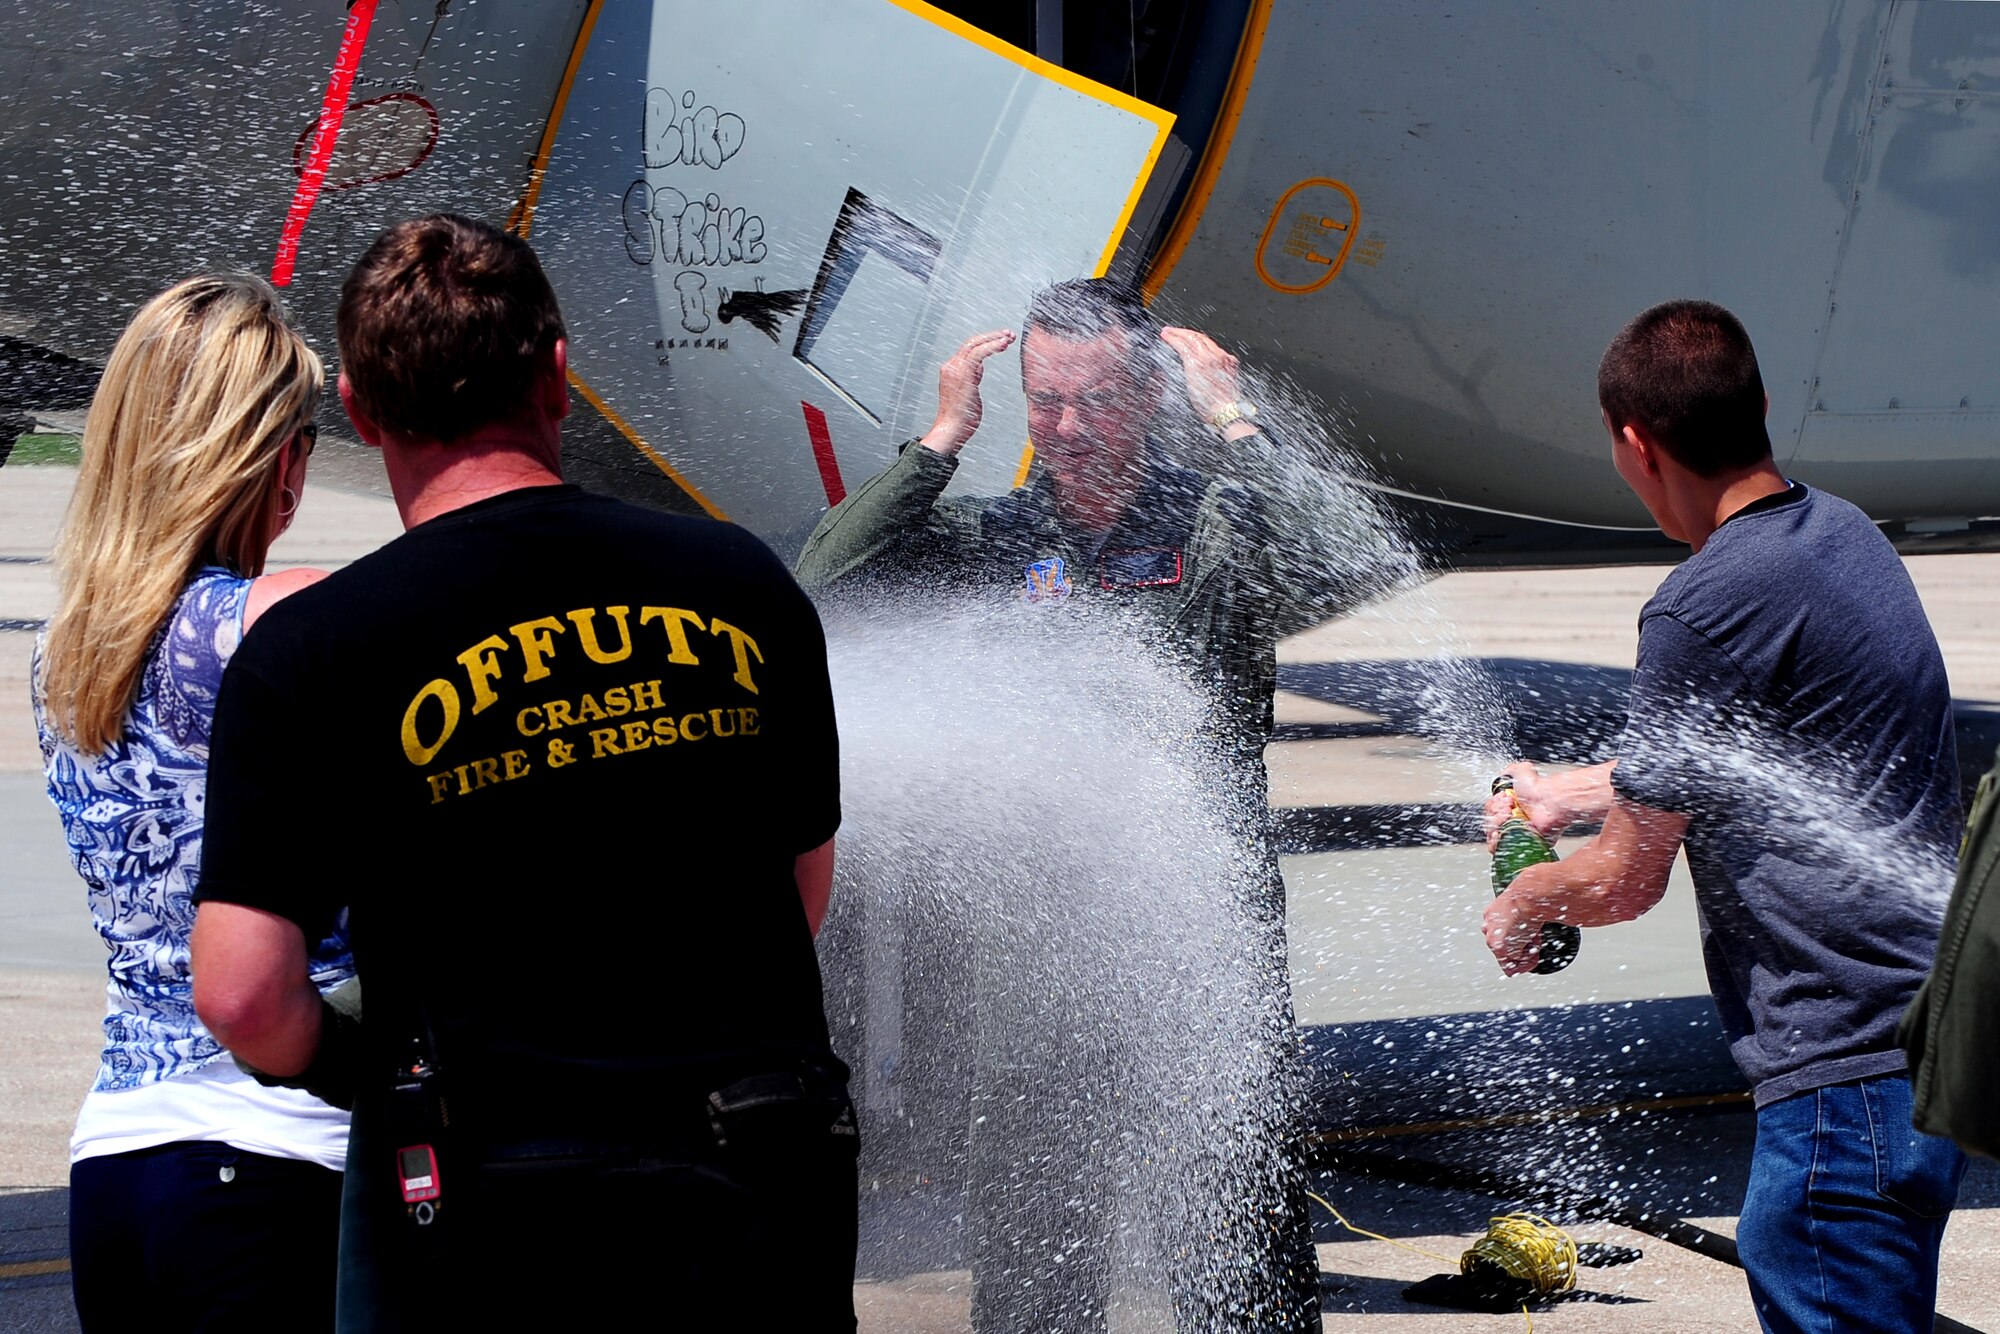 U.S. Air Force Brig. Gen. Donald Bacon, 55th Wing Commander, get hosed down by his wife and son following his fini flight, symbolizing the end of his command June 26 at Offutt Air Force Base, Neb. The "Fini Flight" is a military tradition where a commander gets hosed down by family and aircrew members on their final flight with the wing prior to relinquishing command.  (U.S. Air Force photo by Josh Plueger/Released)